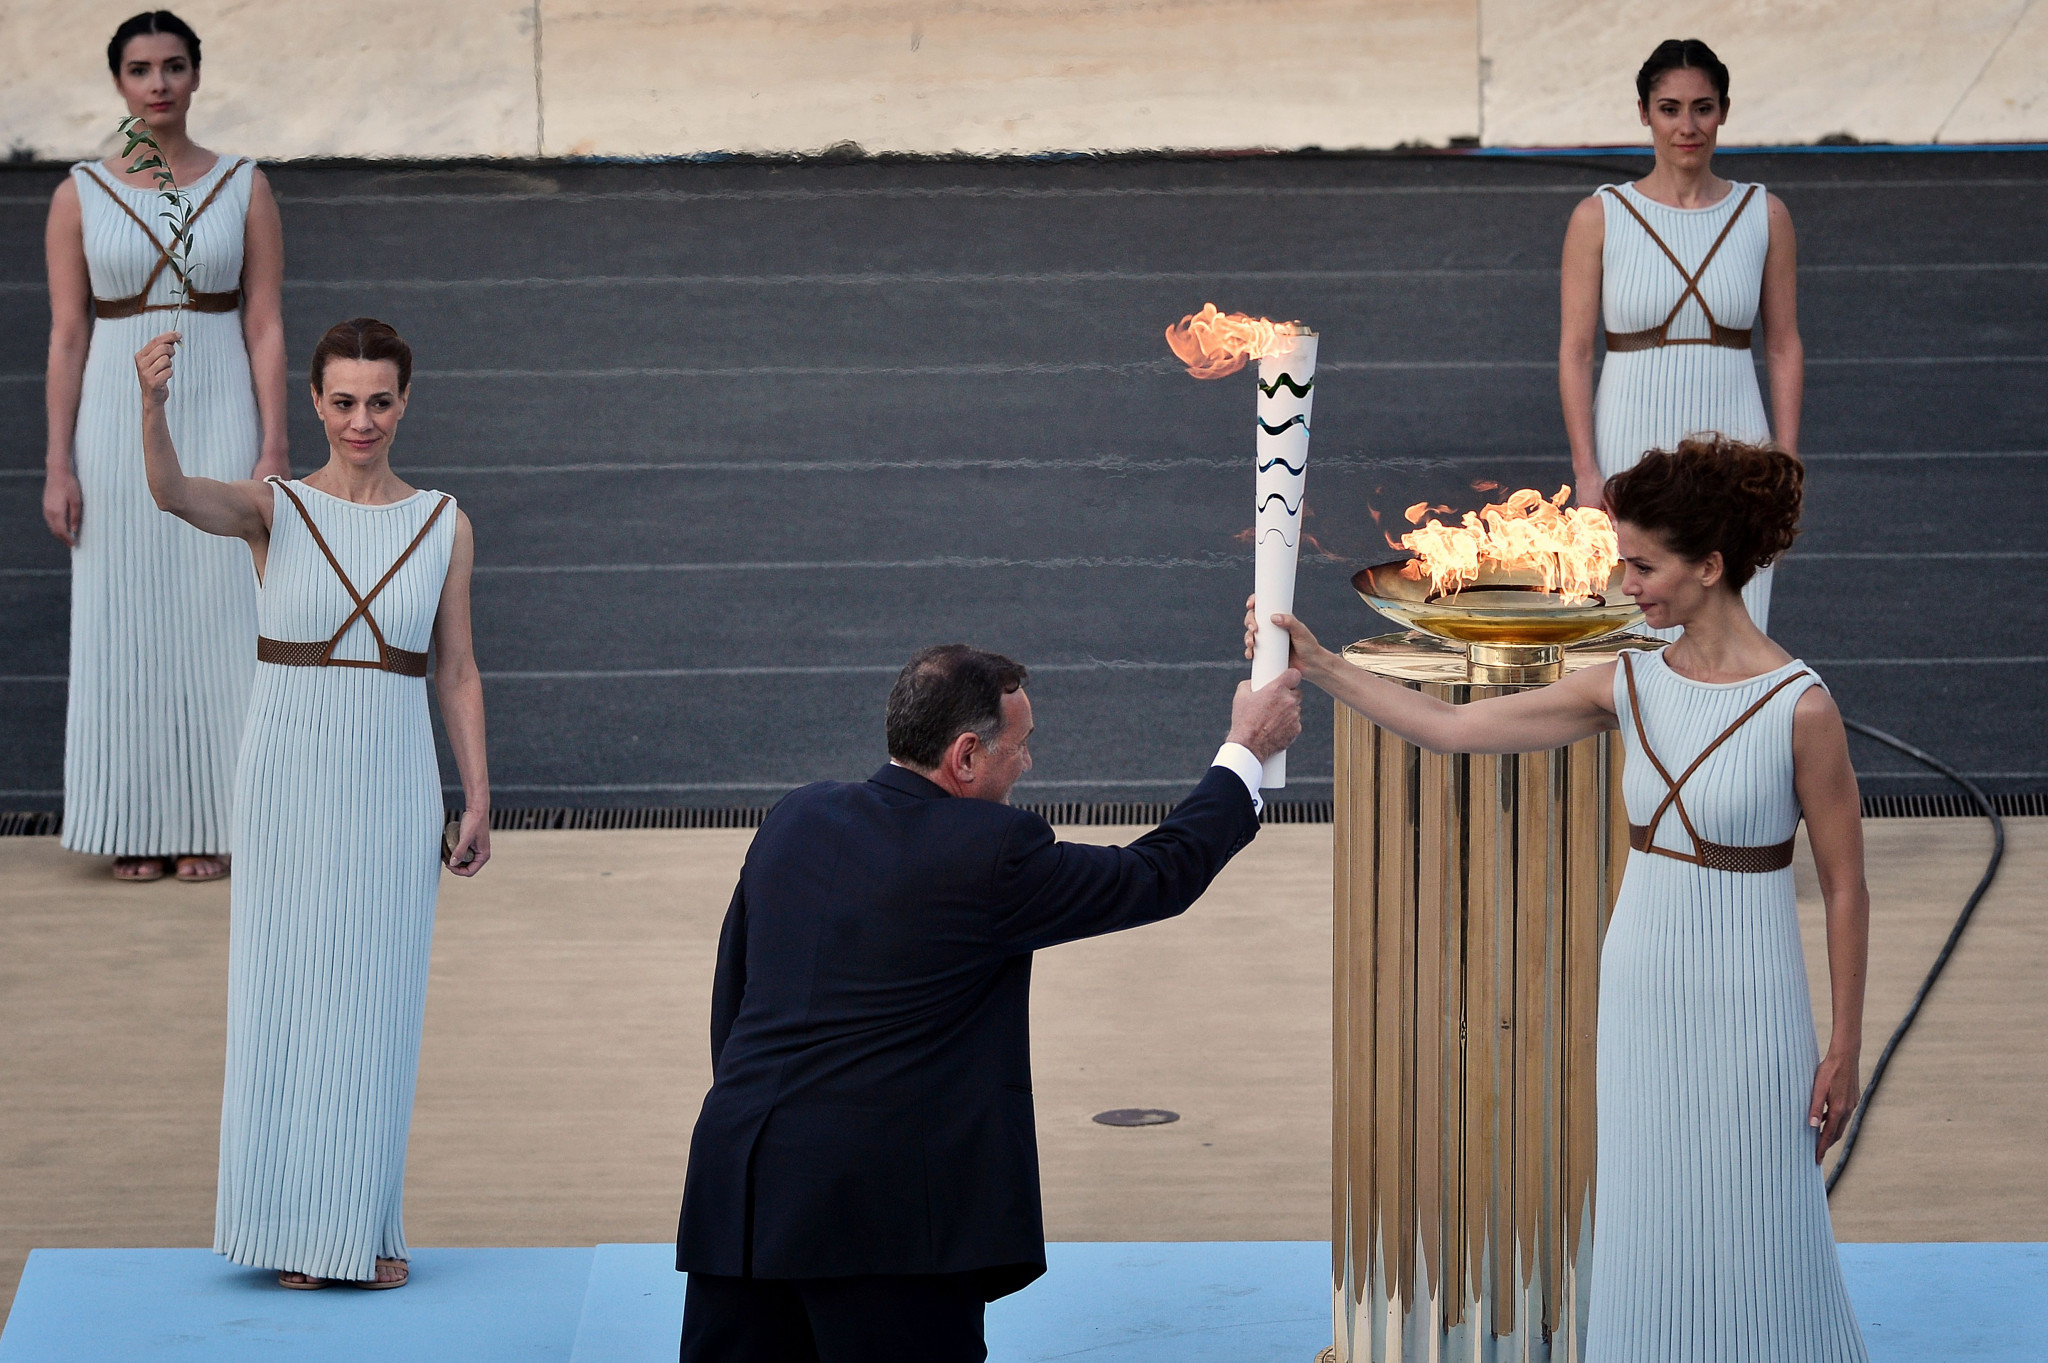 Hellenic Olympic Committee President Spyros Capralos said organisers of the Torch Relay have been in discussion with Greek health authorities ©Getty Images